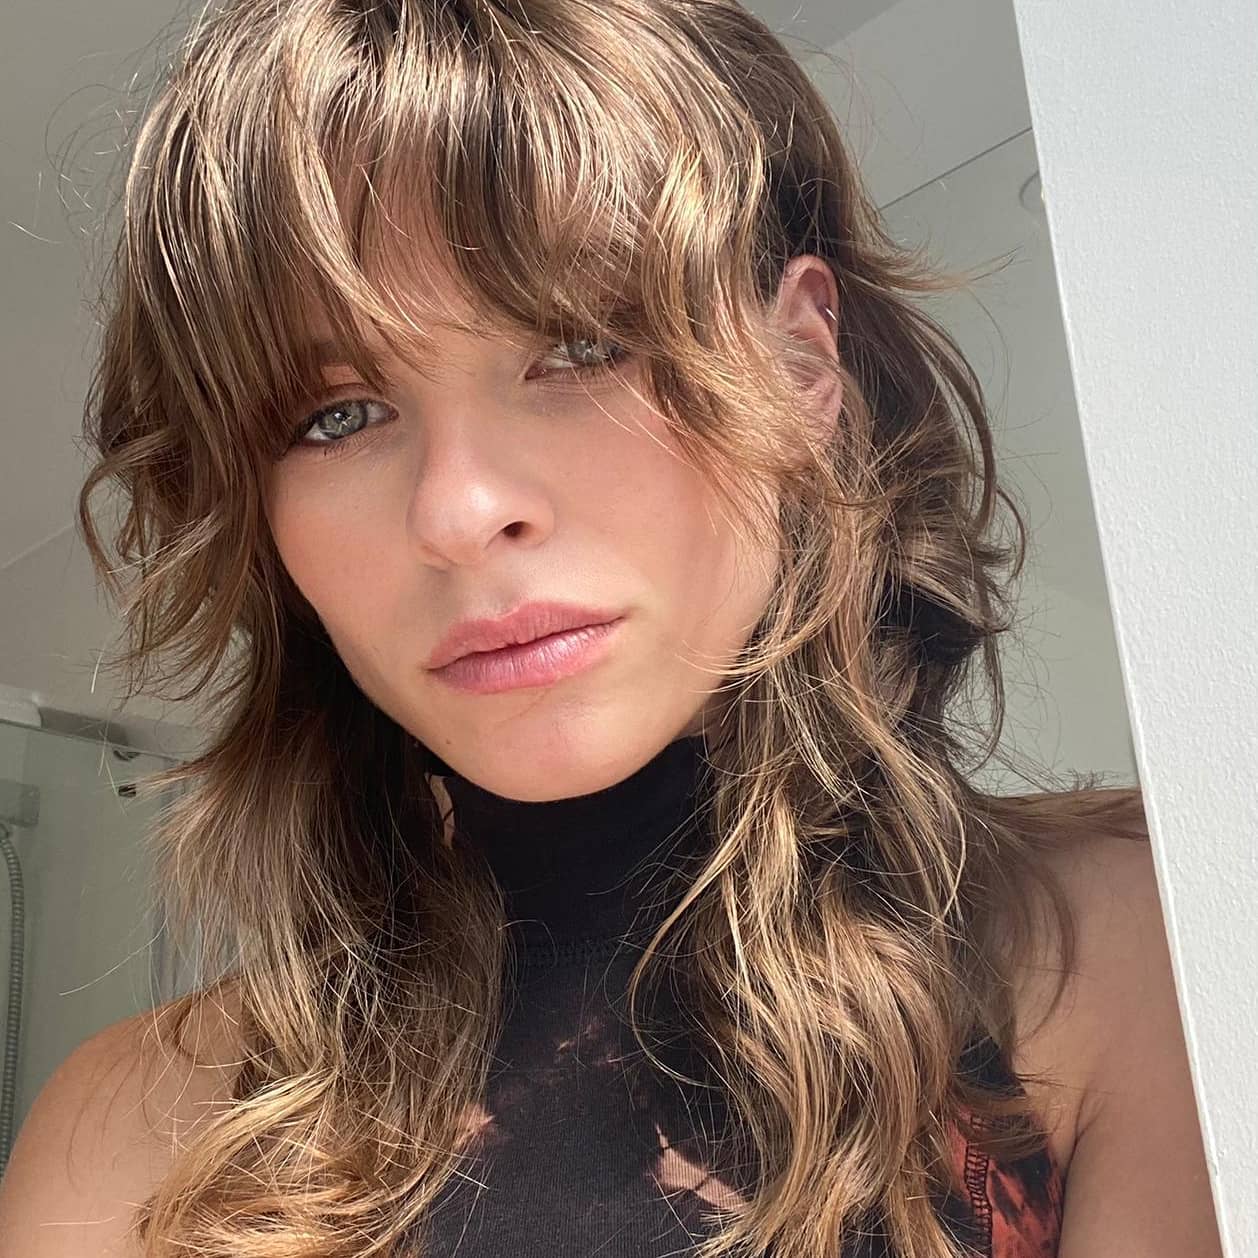 callie brooks recommends hot girls with bangs pic